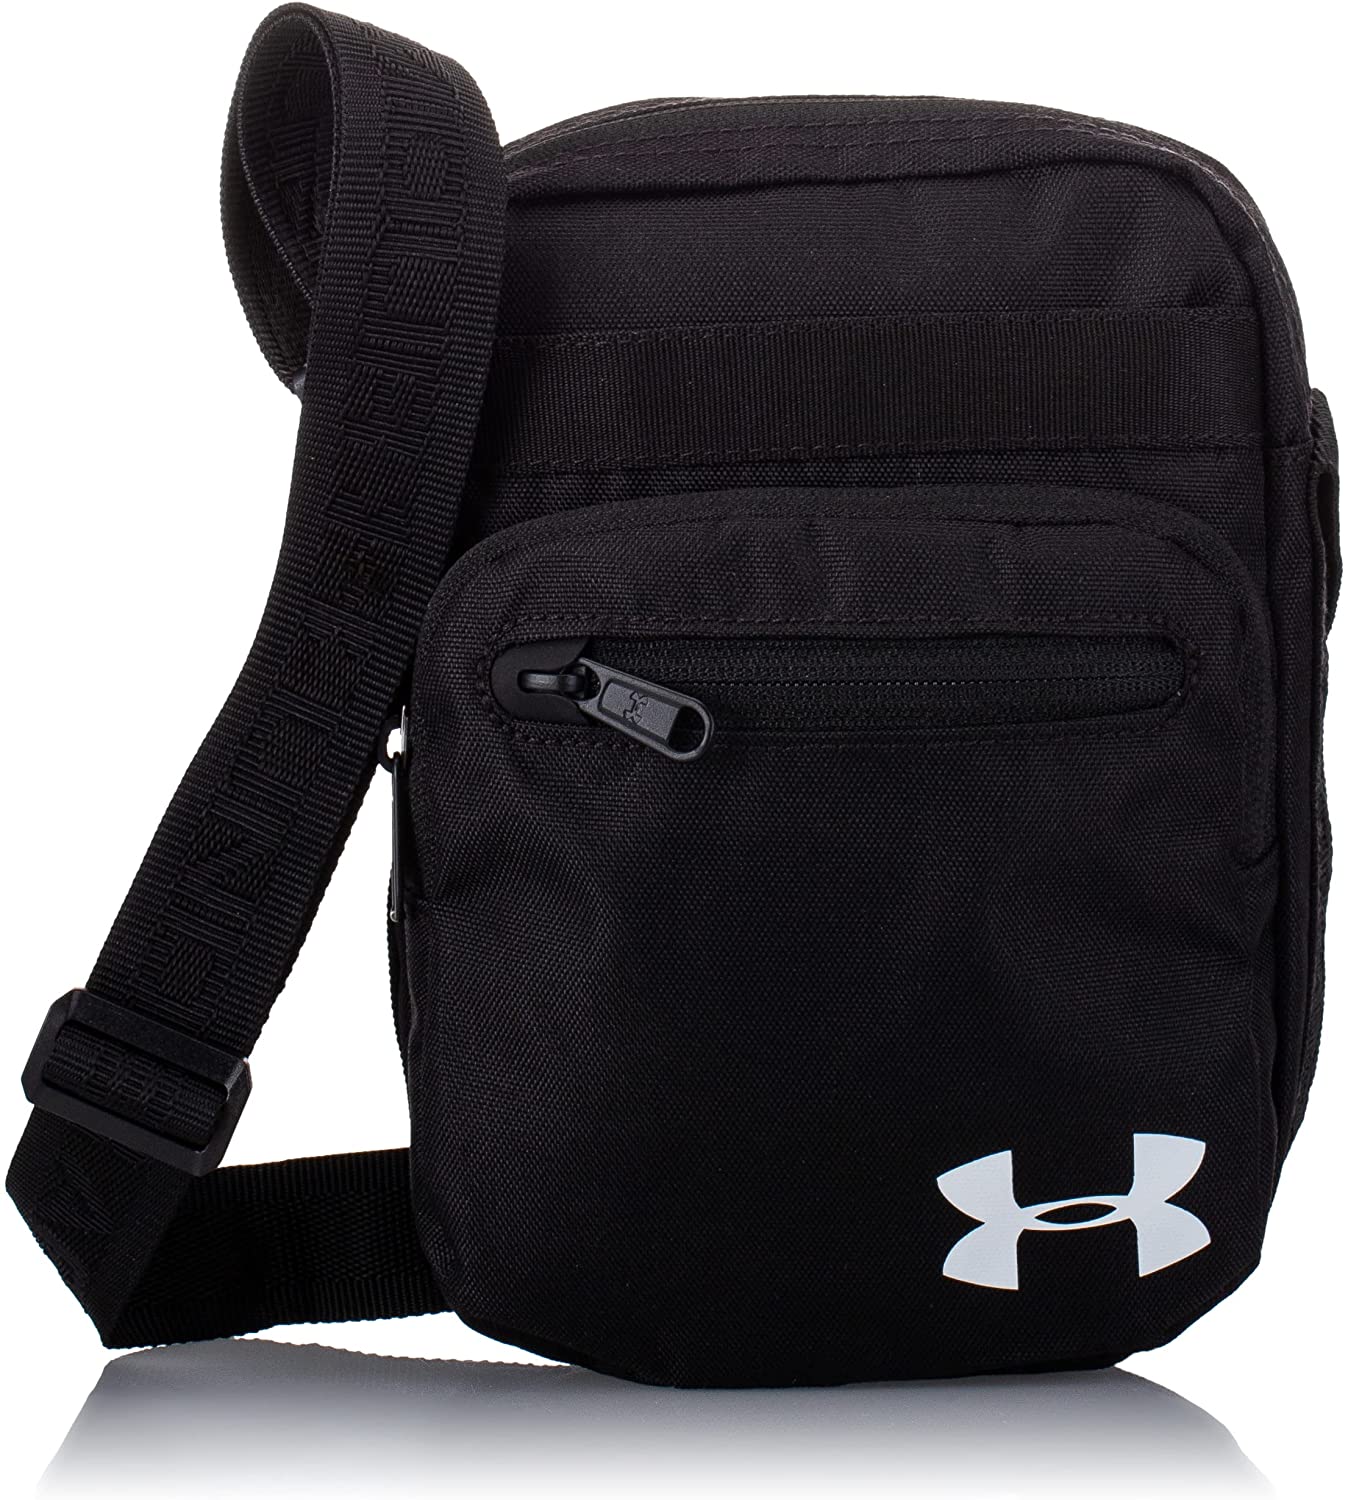 Under Armour Water-Resistant Finish Crossbody Bag